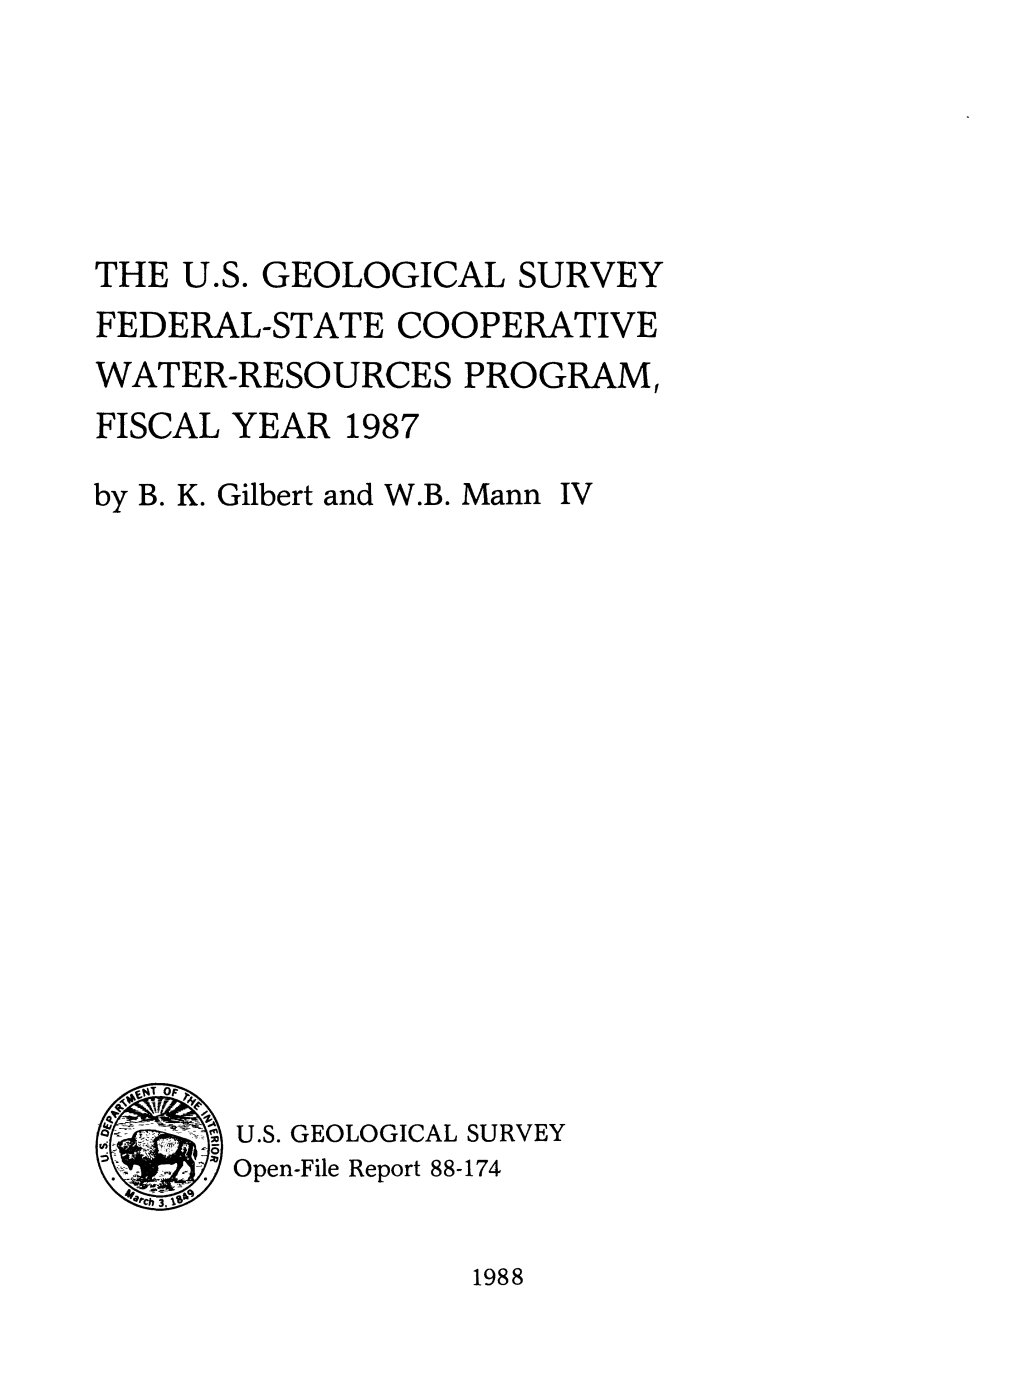 THE U.S. GEOLOGICAL SURVEY FEDERAL-STATE COOPERATIVE WATER-RESOURCES PROGRAM, FISCAL YEAR 1987 by B